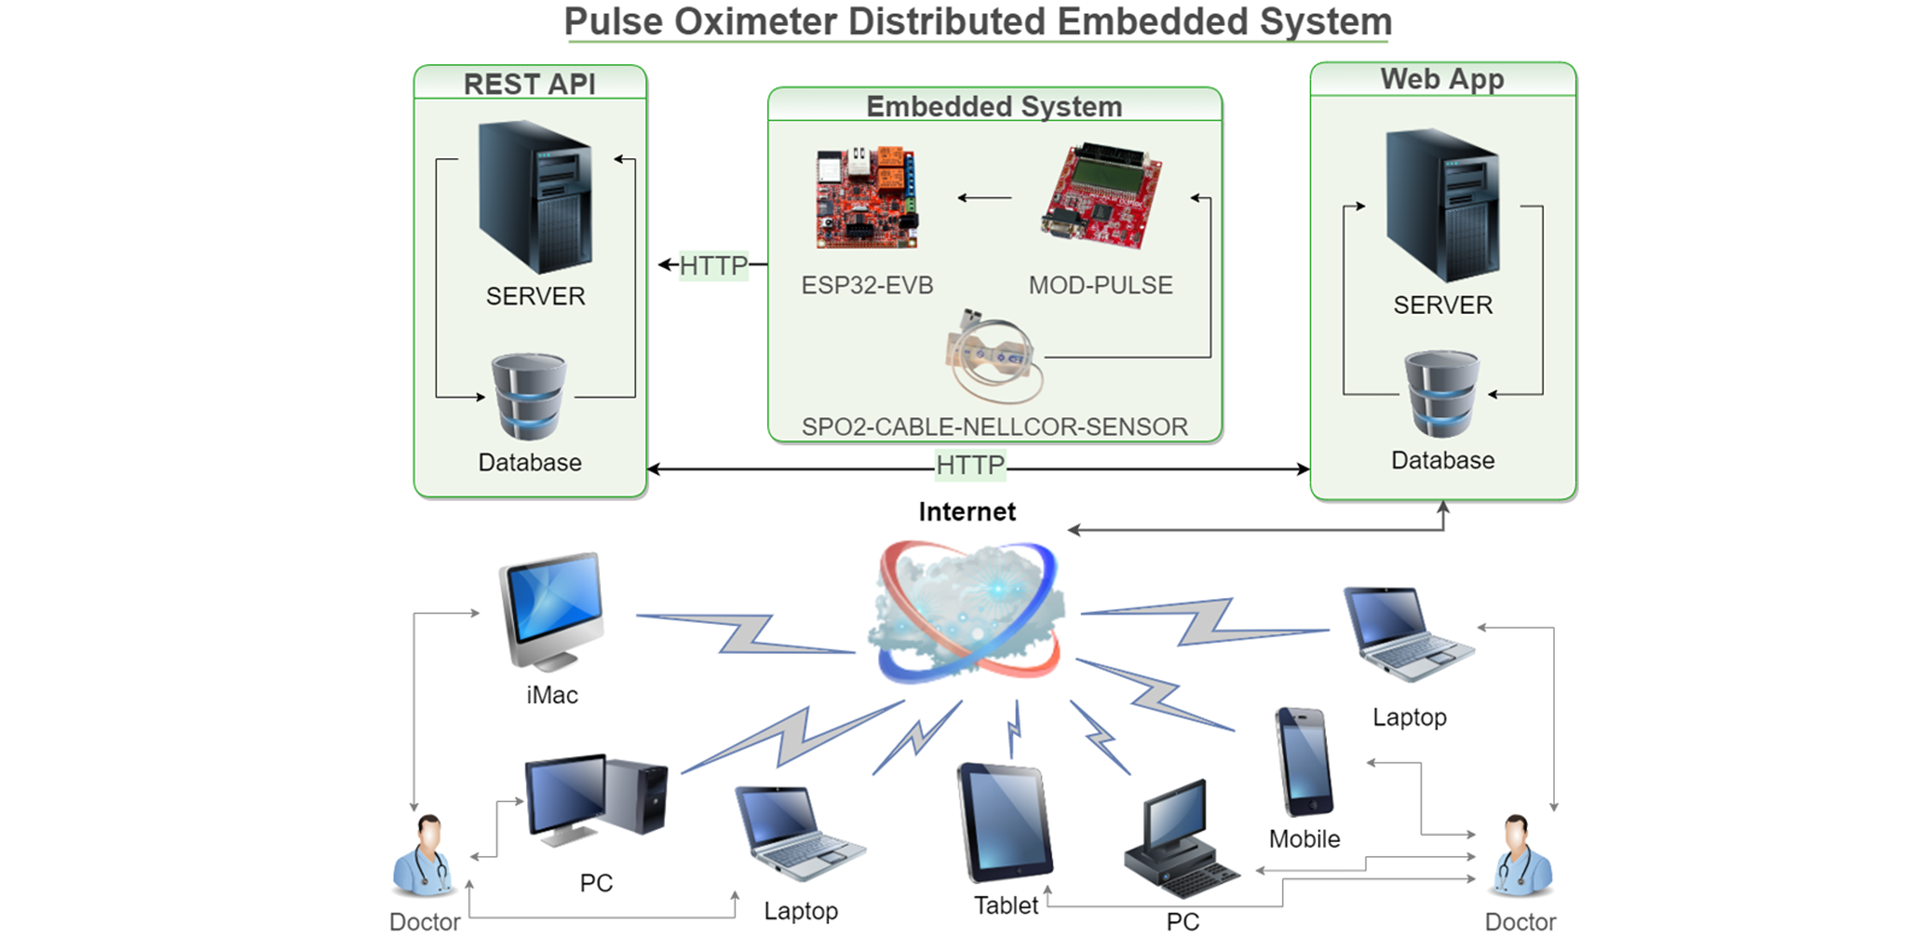 Pulse Oximeter Distributed Embedded System - Schema